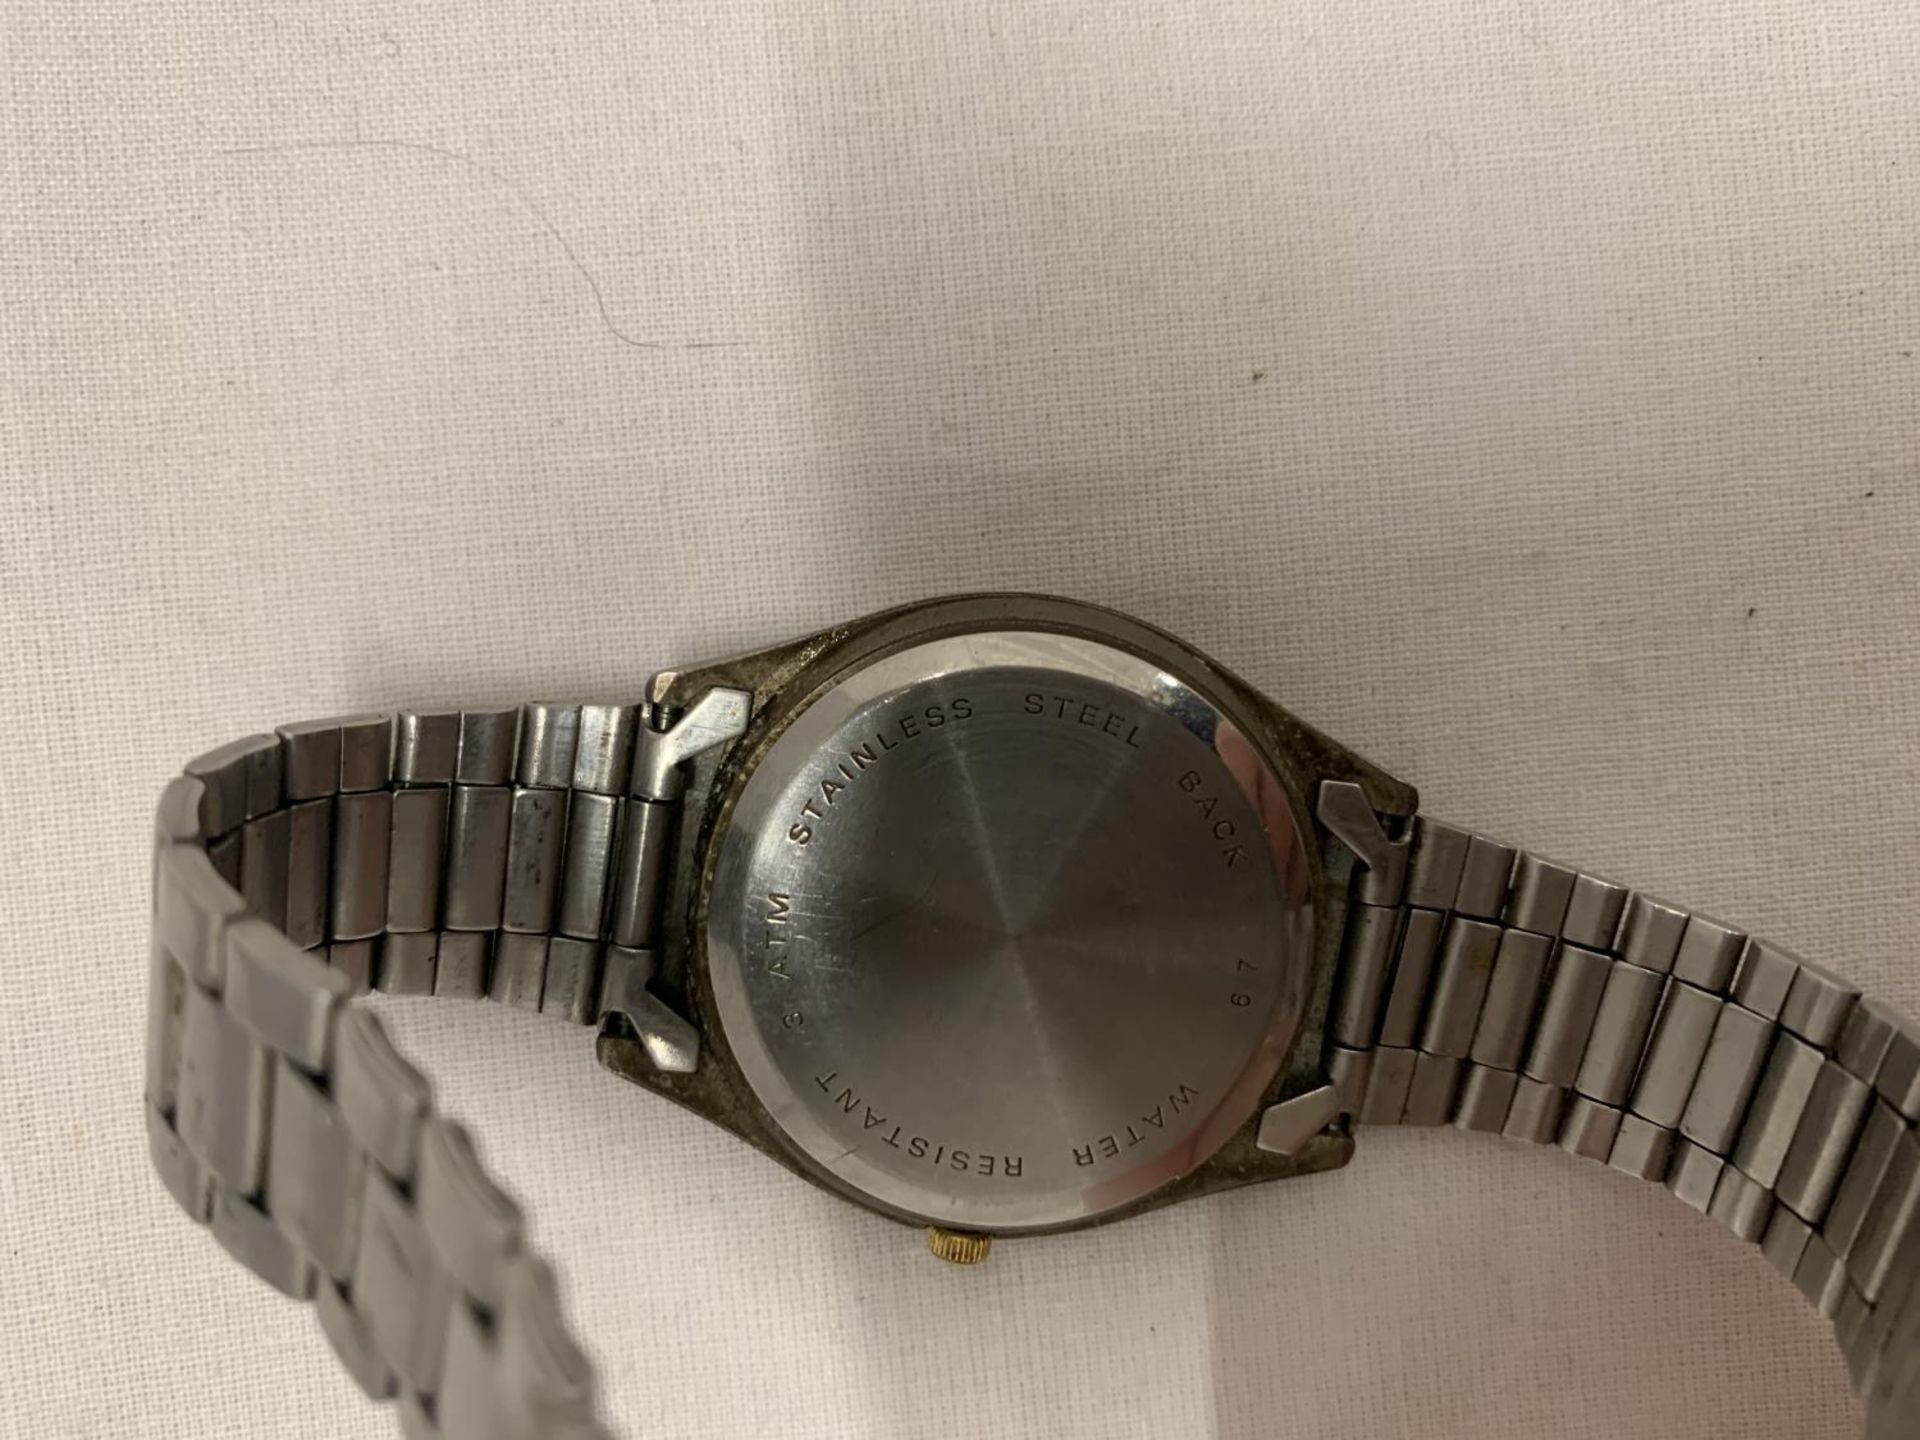 A VINTAGE MEN'S SEKONDA WRISTWATCH, WORKING AT TIME OF CATOLOGUING, NO WARRANTY GIVEN - Image 2 of 3